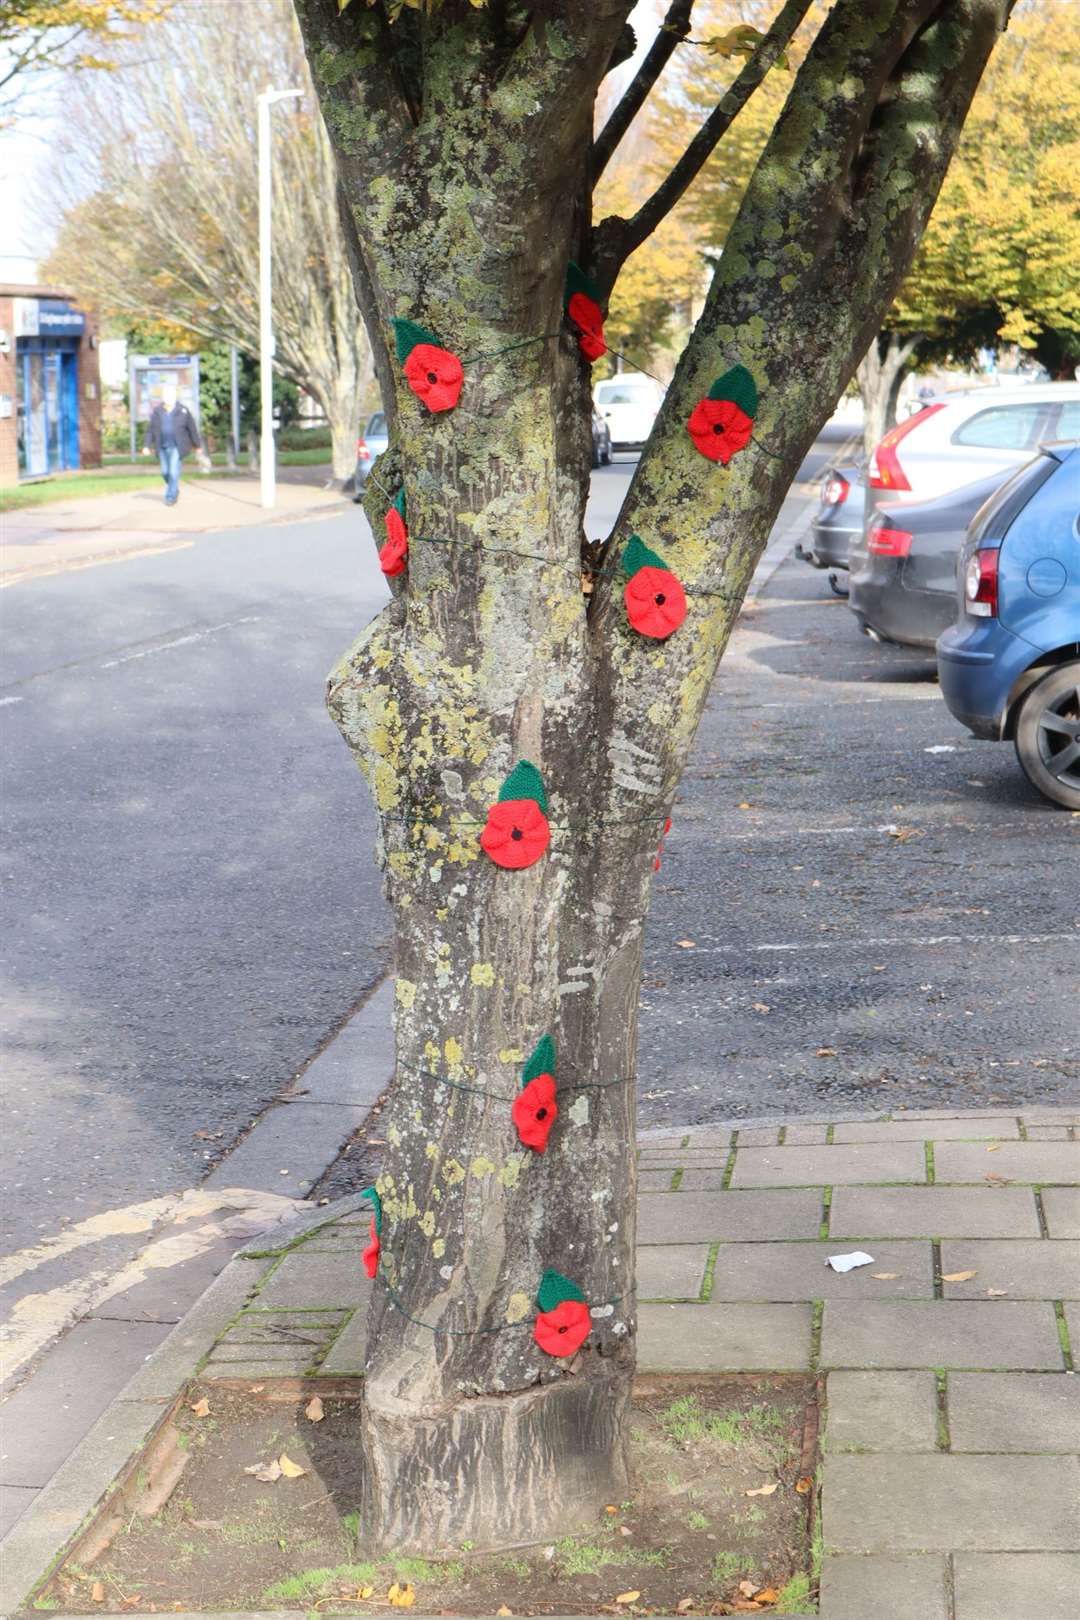 One of the trees in Central Avenue, Sittingbourne, covered in poppies